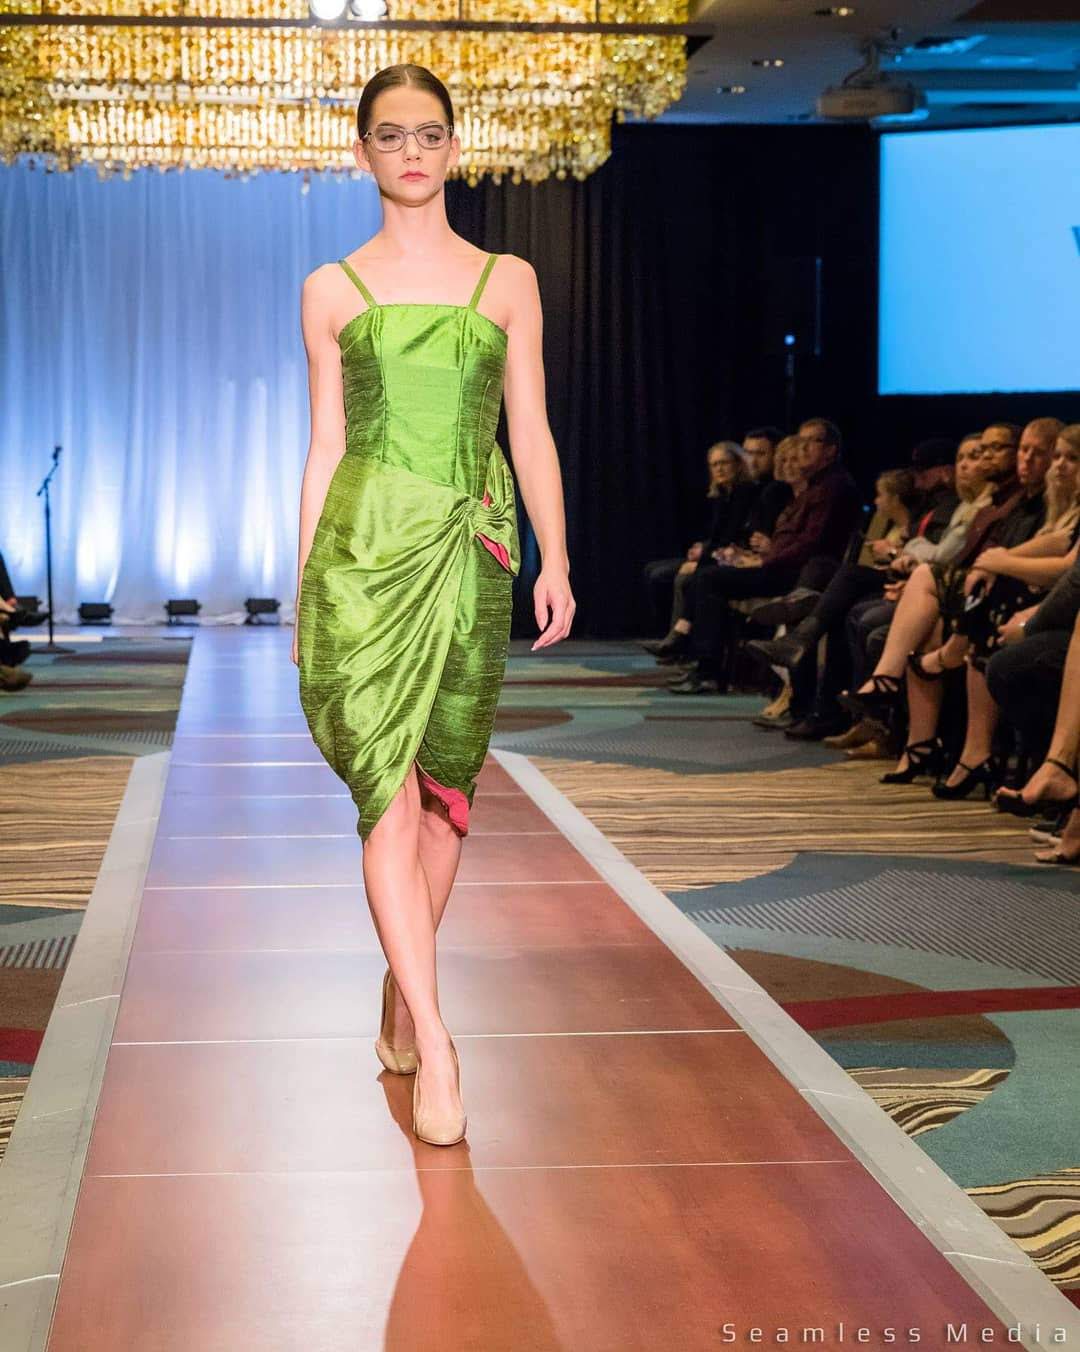 Chartreuse Silk Dress by Hollyville